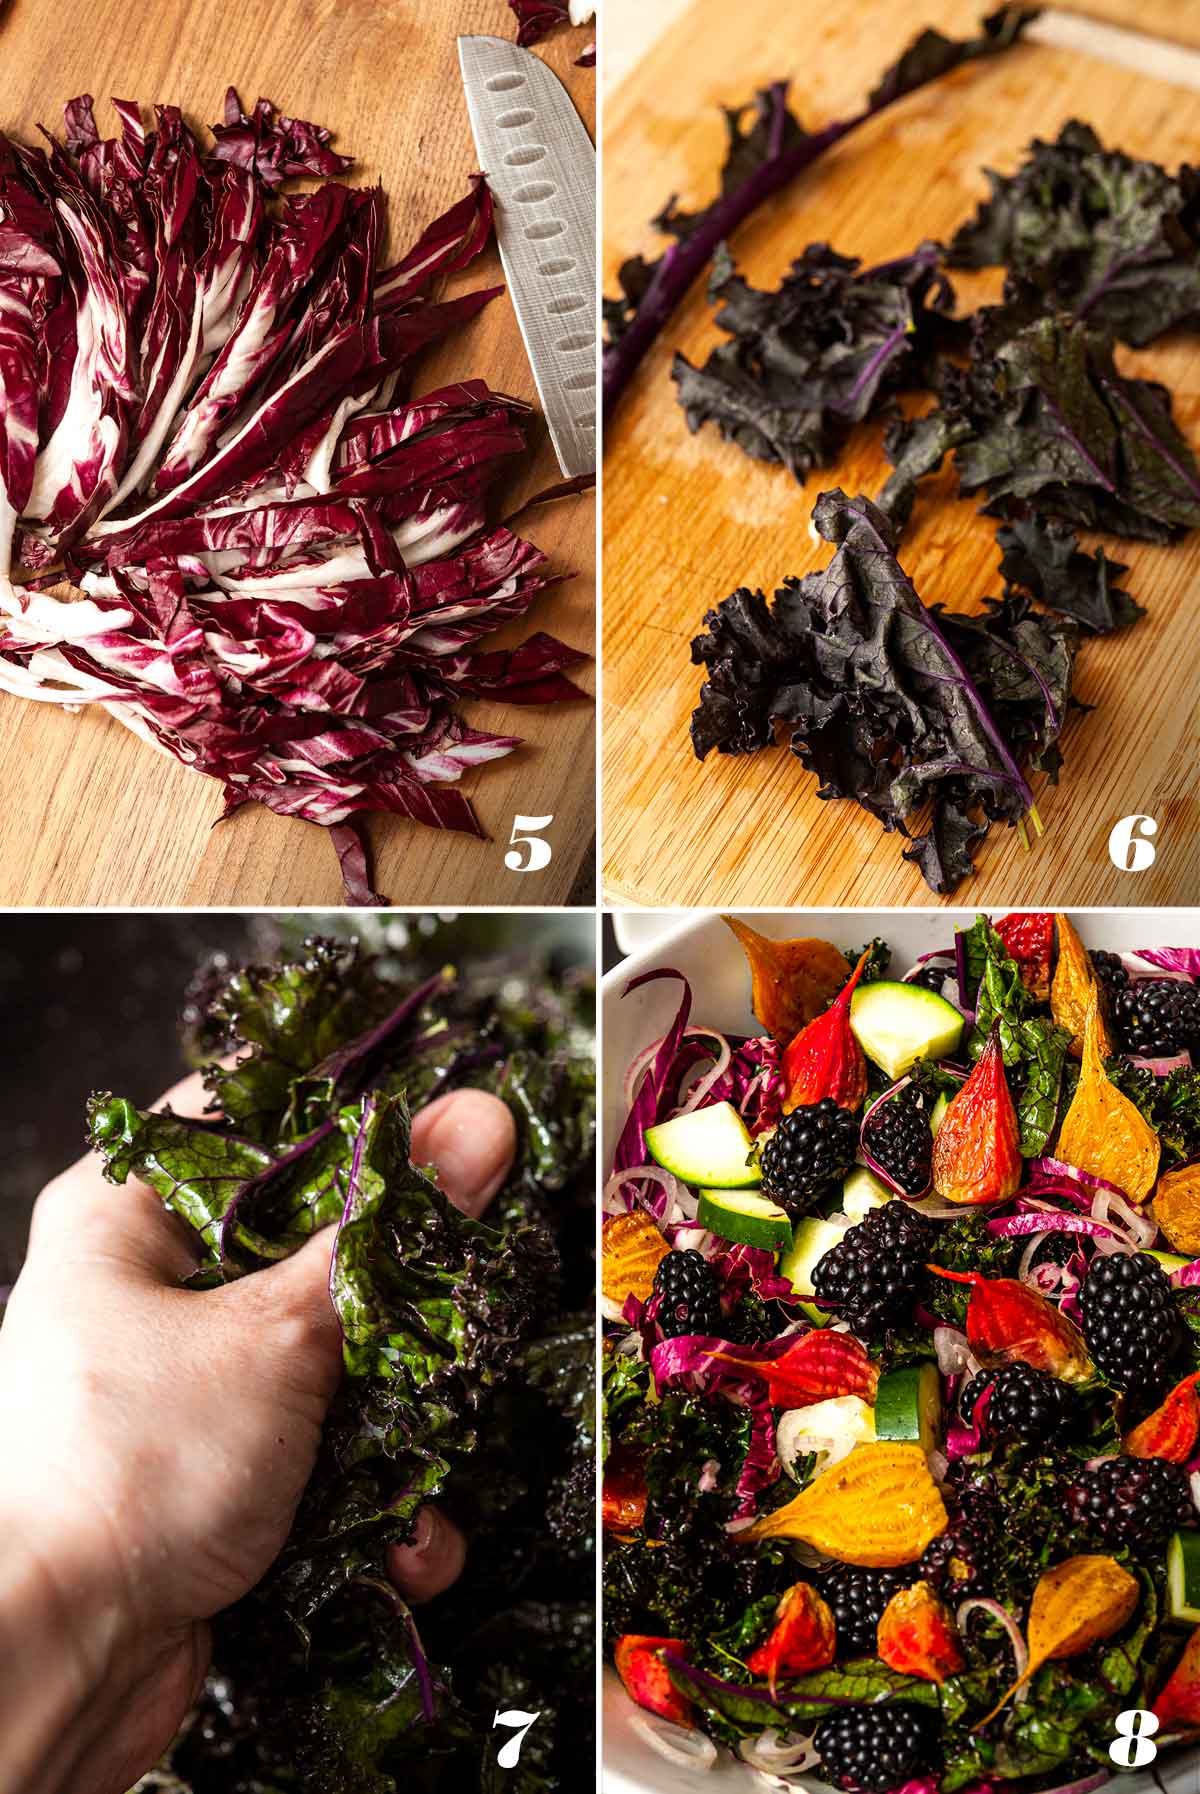 A collage of 4 numbered images showing how to create Halloween salad.